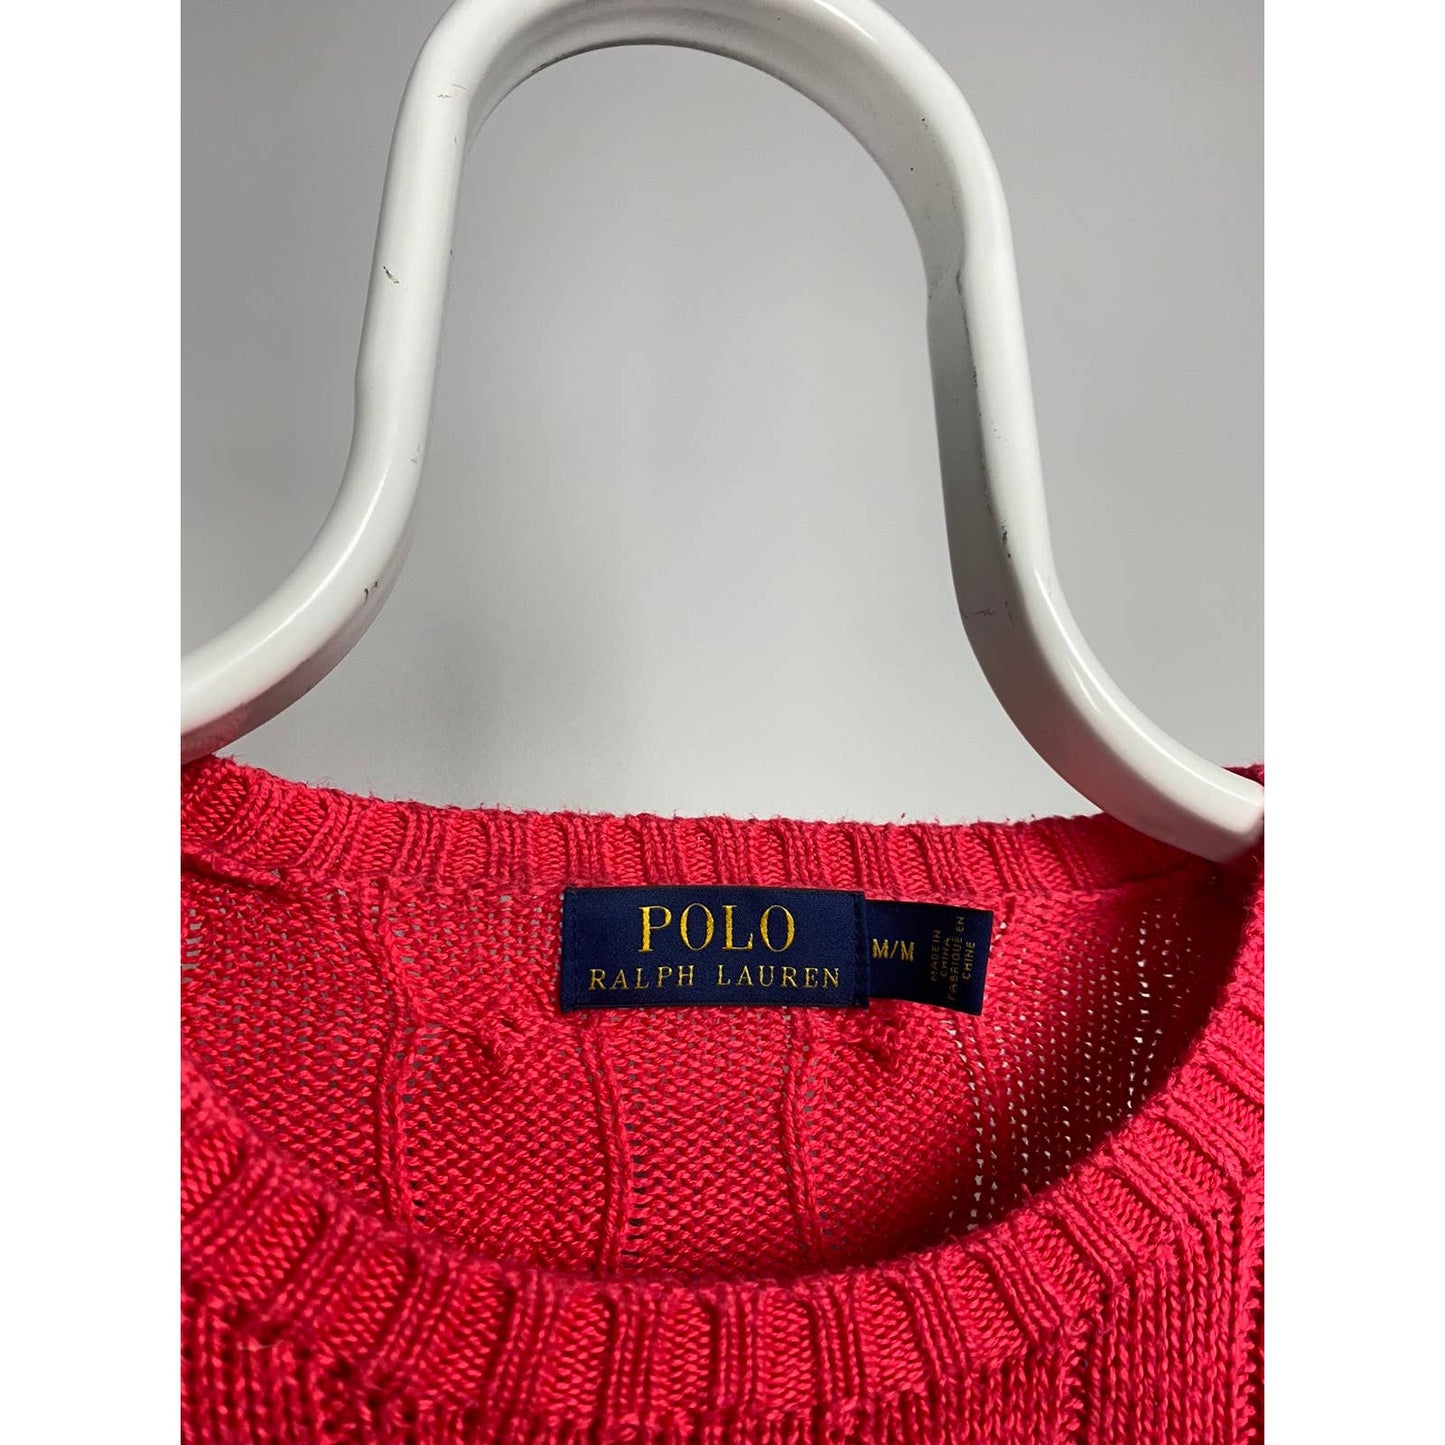 Polo Ralph Lauren Pink cable knit sweater